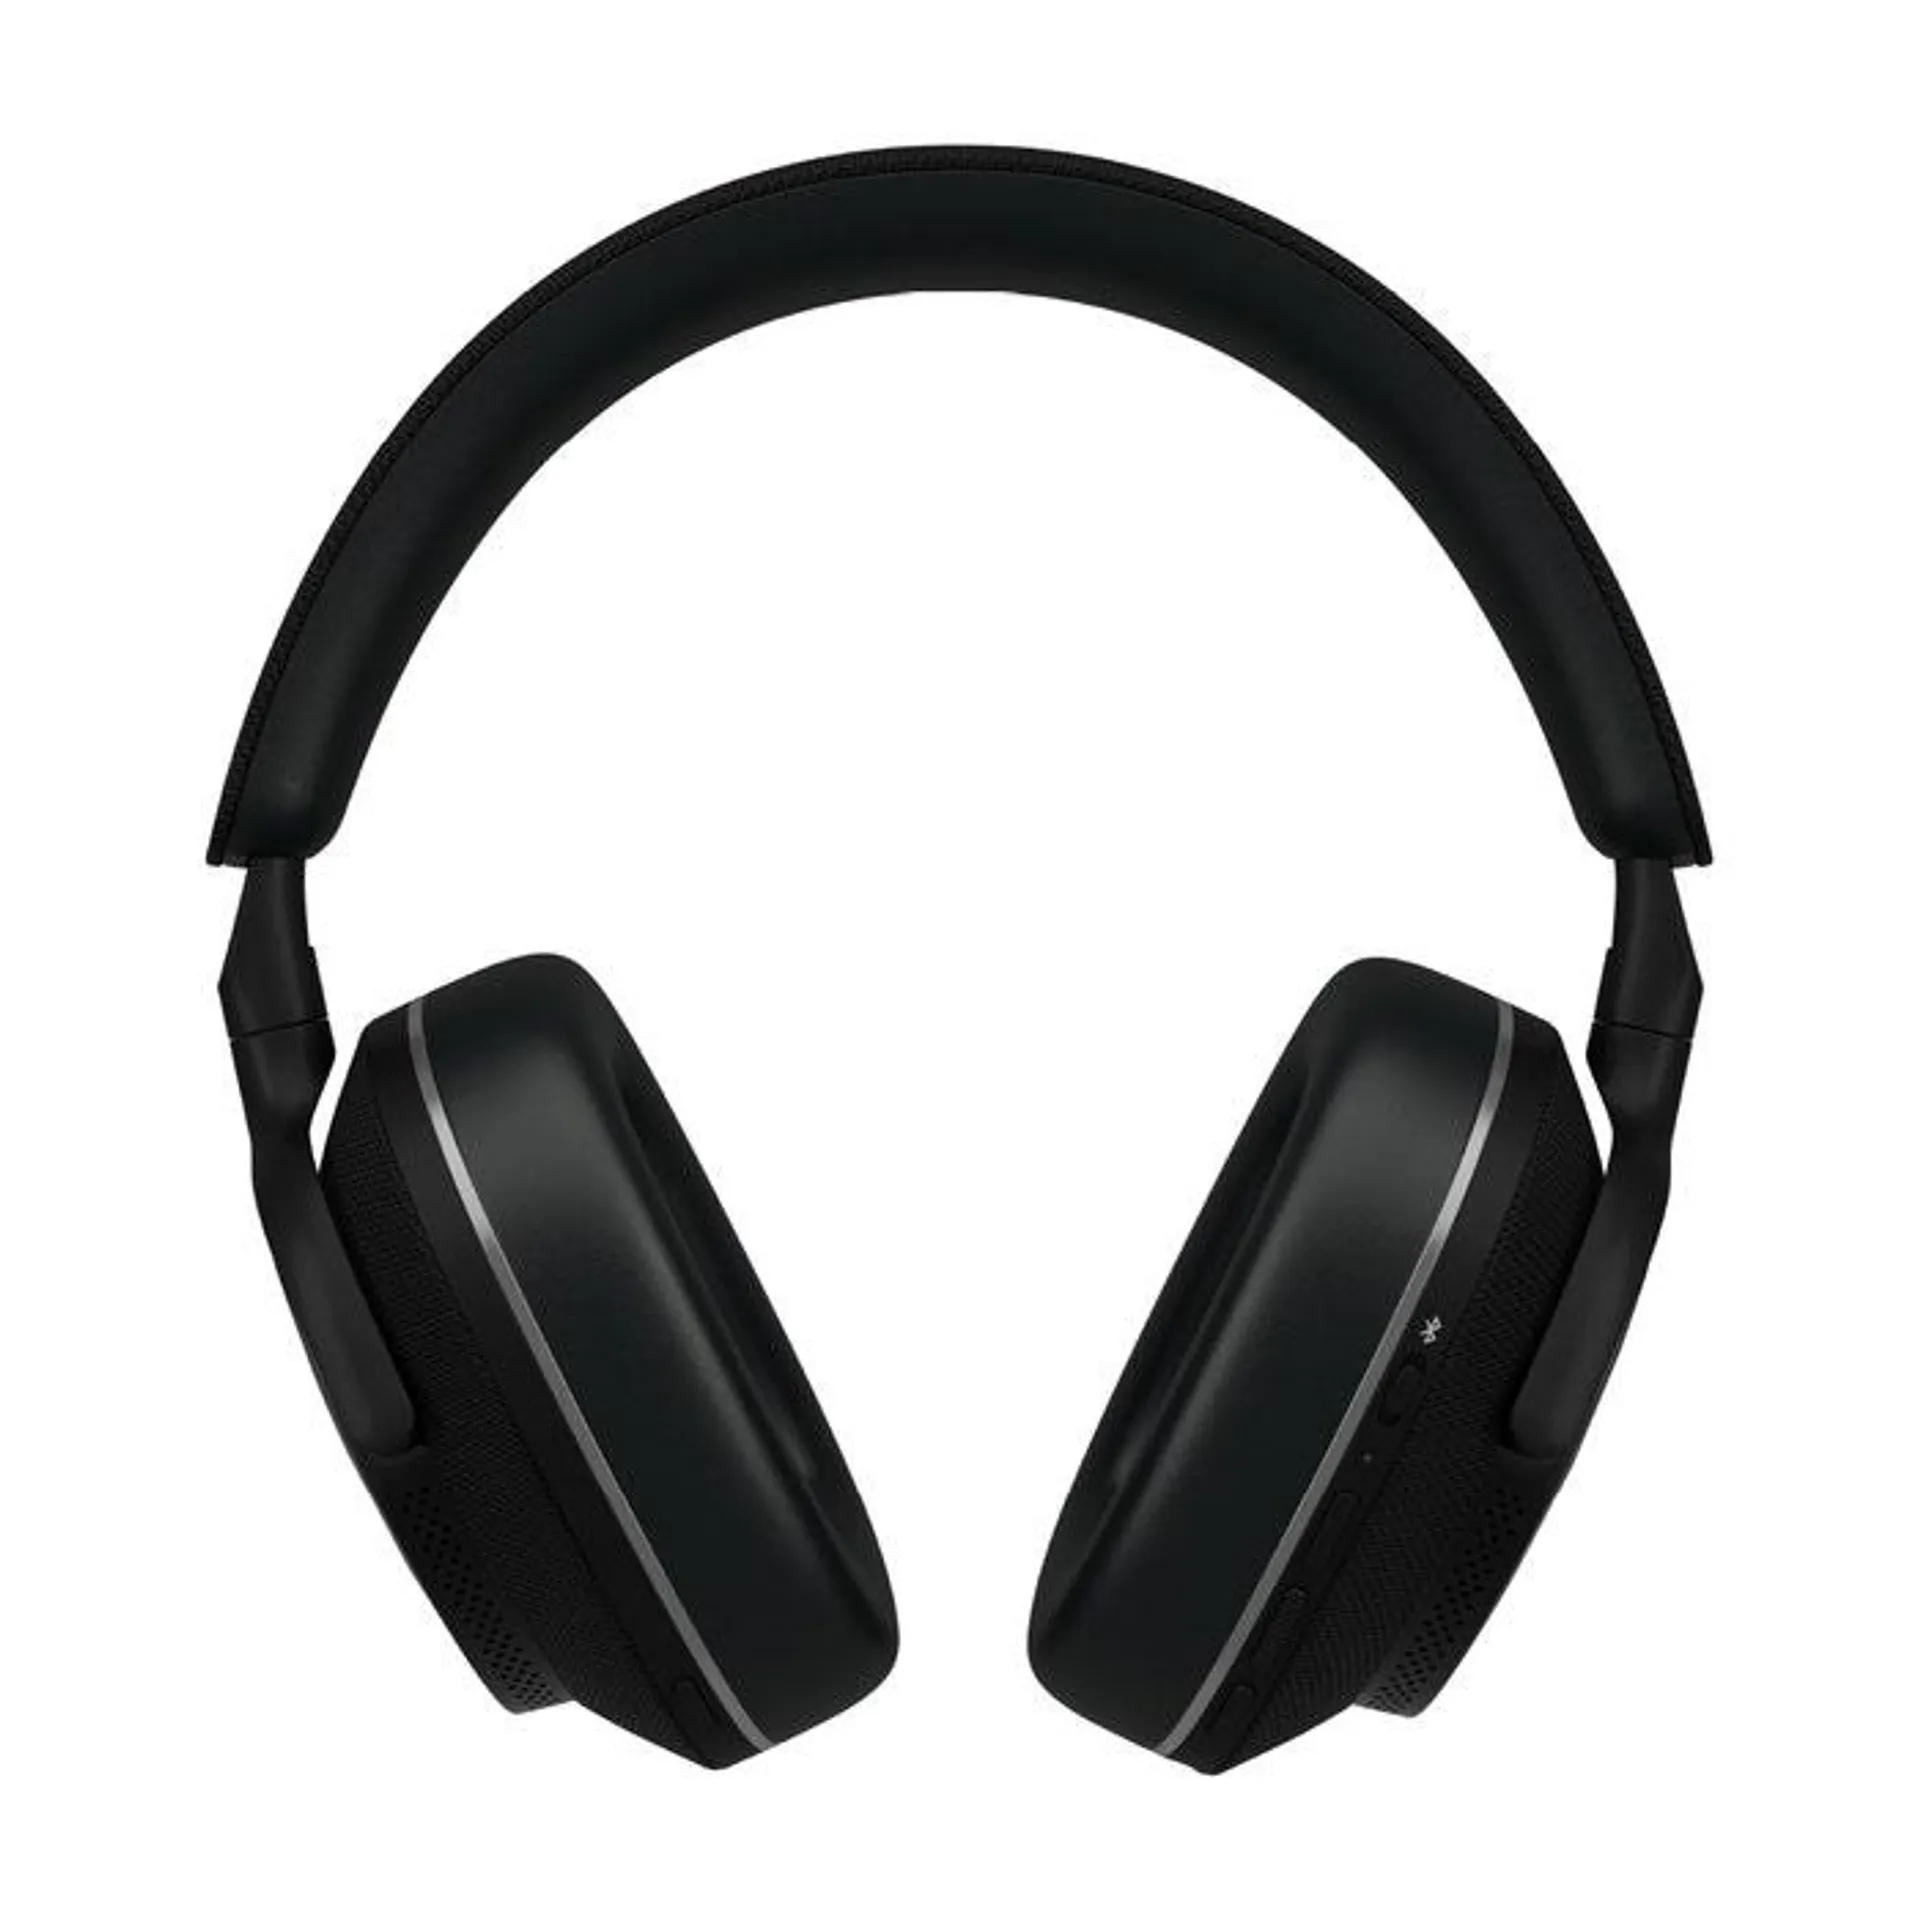 Bowers & Wilkins Px7 S2e Over-Ear Headphones - Anthracite